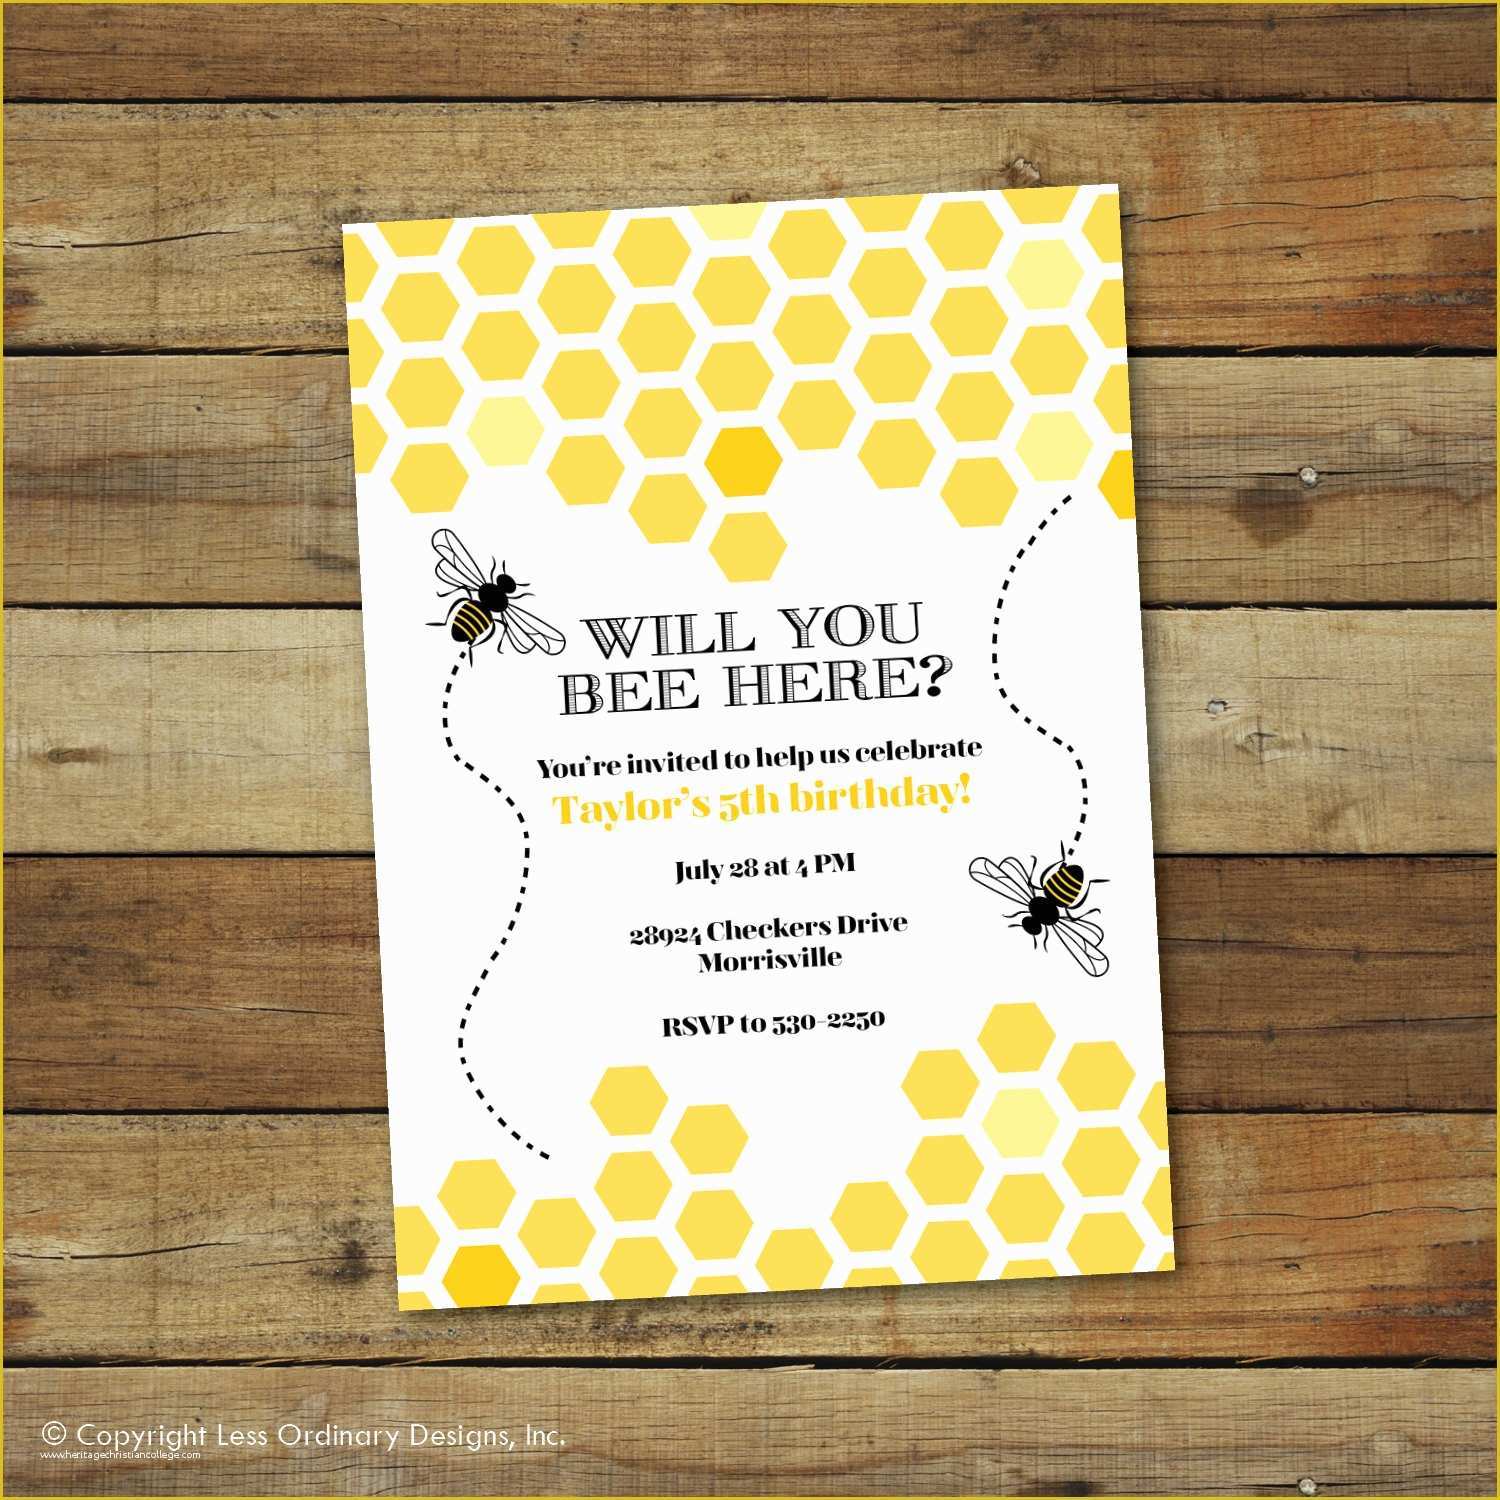 Bumble Bee Invitation Template Free Of Bumble Bee Birthday Party Invitations